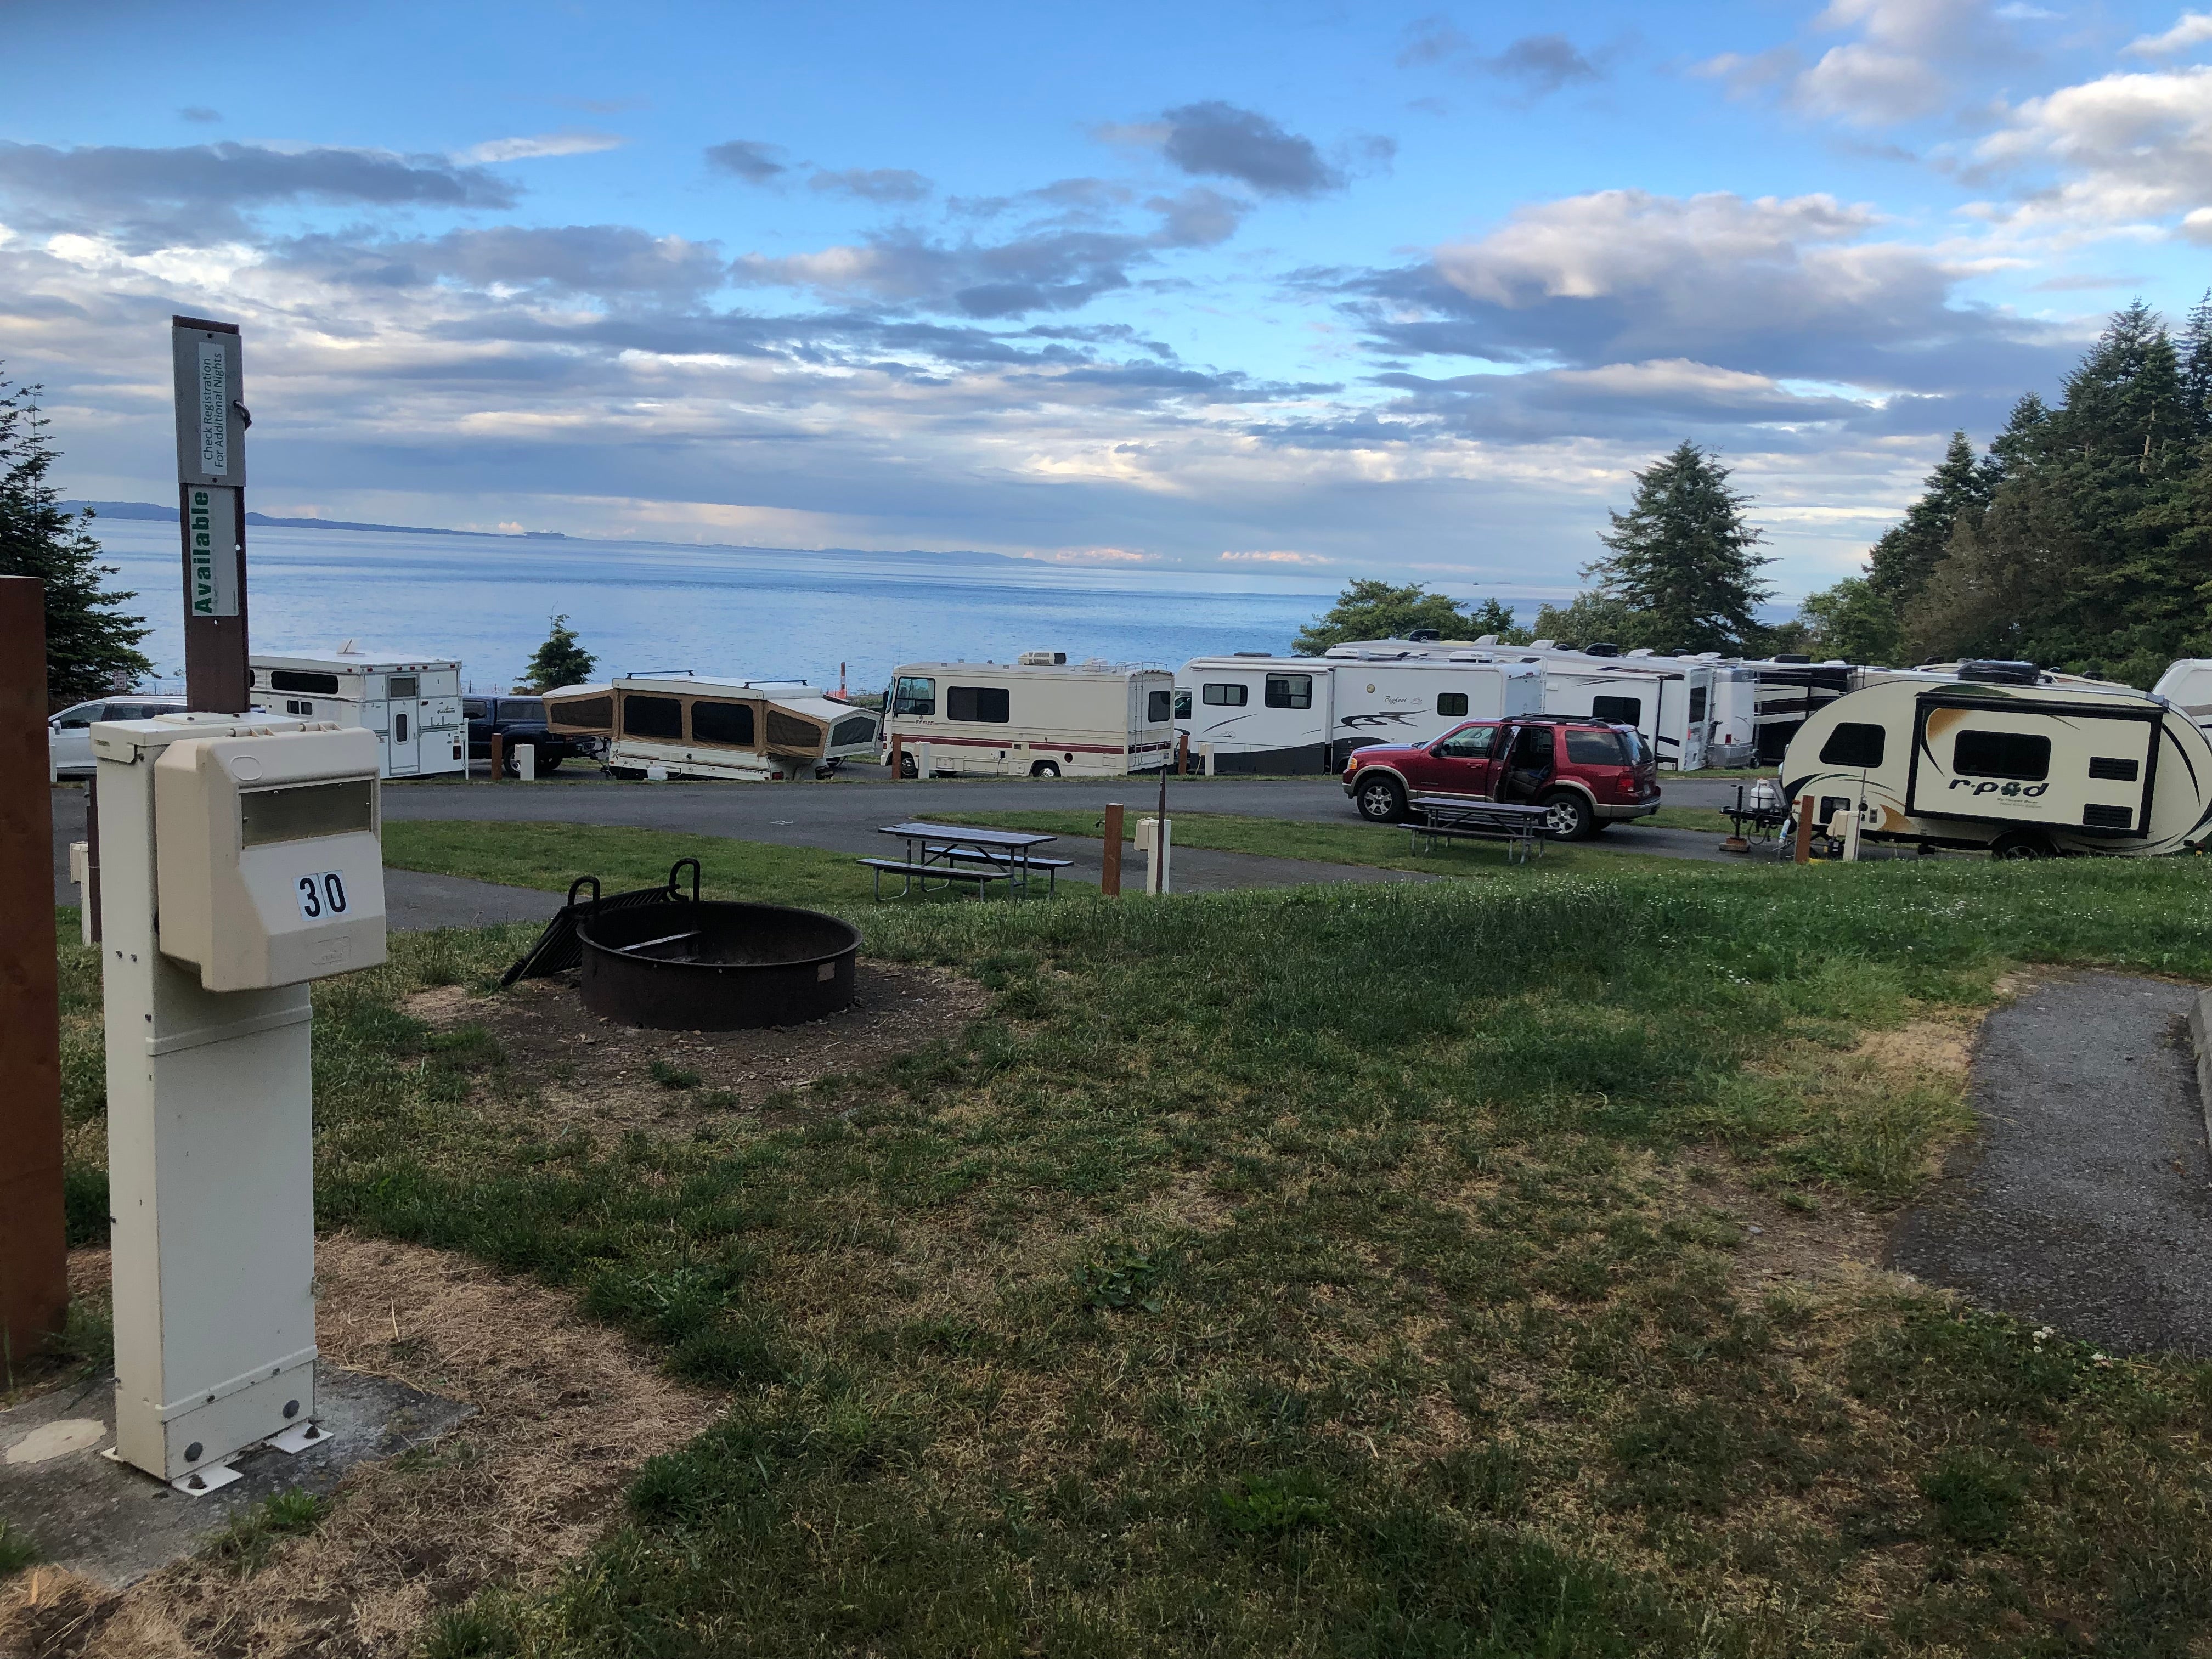 The RV sites do have a nice view of the Strait of San Juan de Fuca